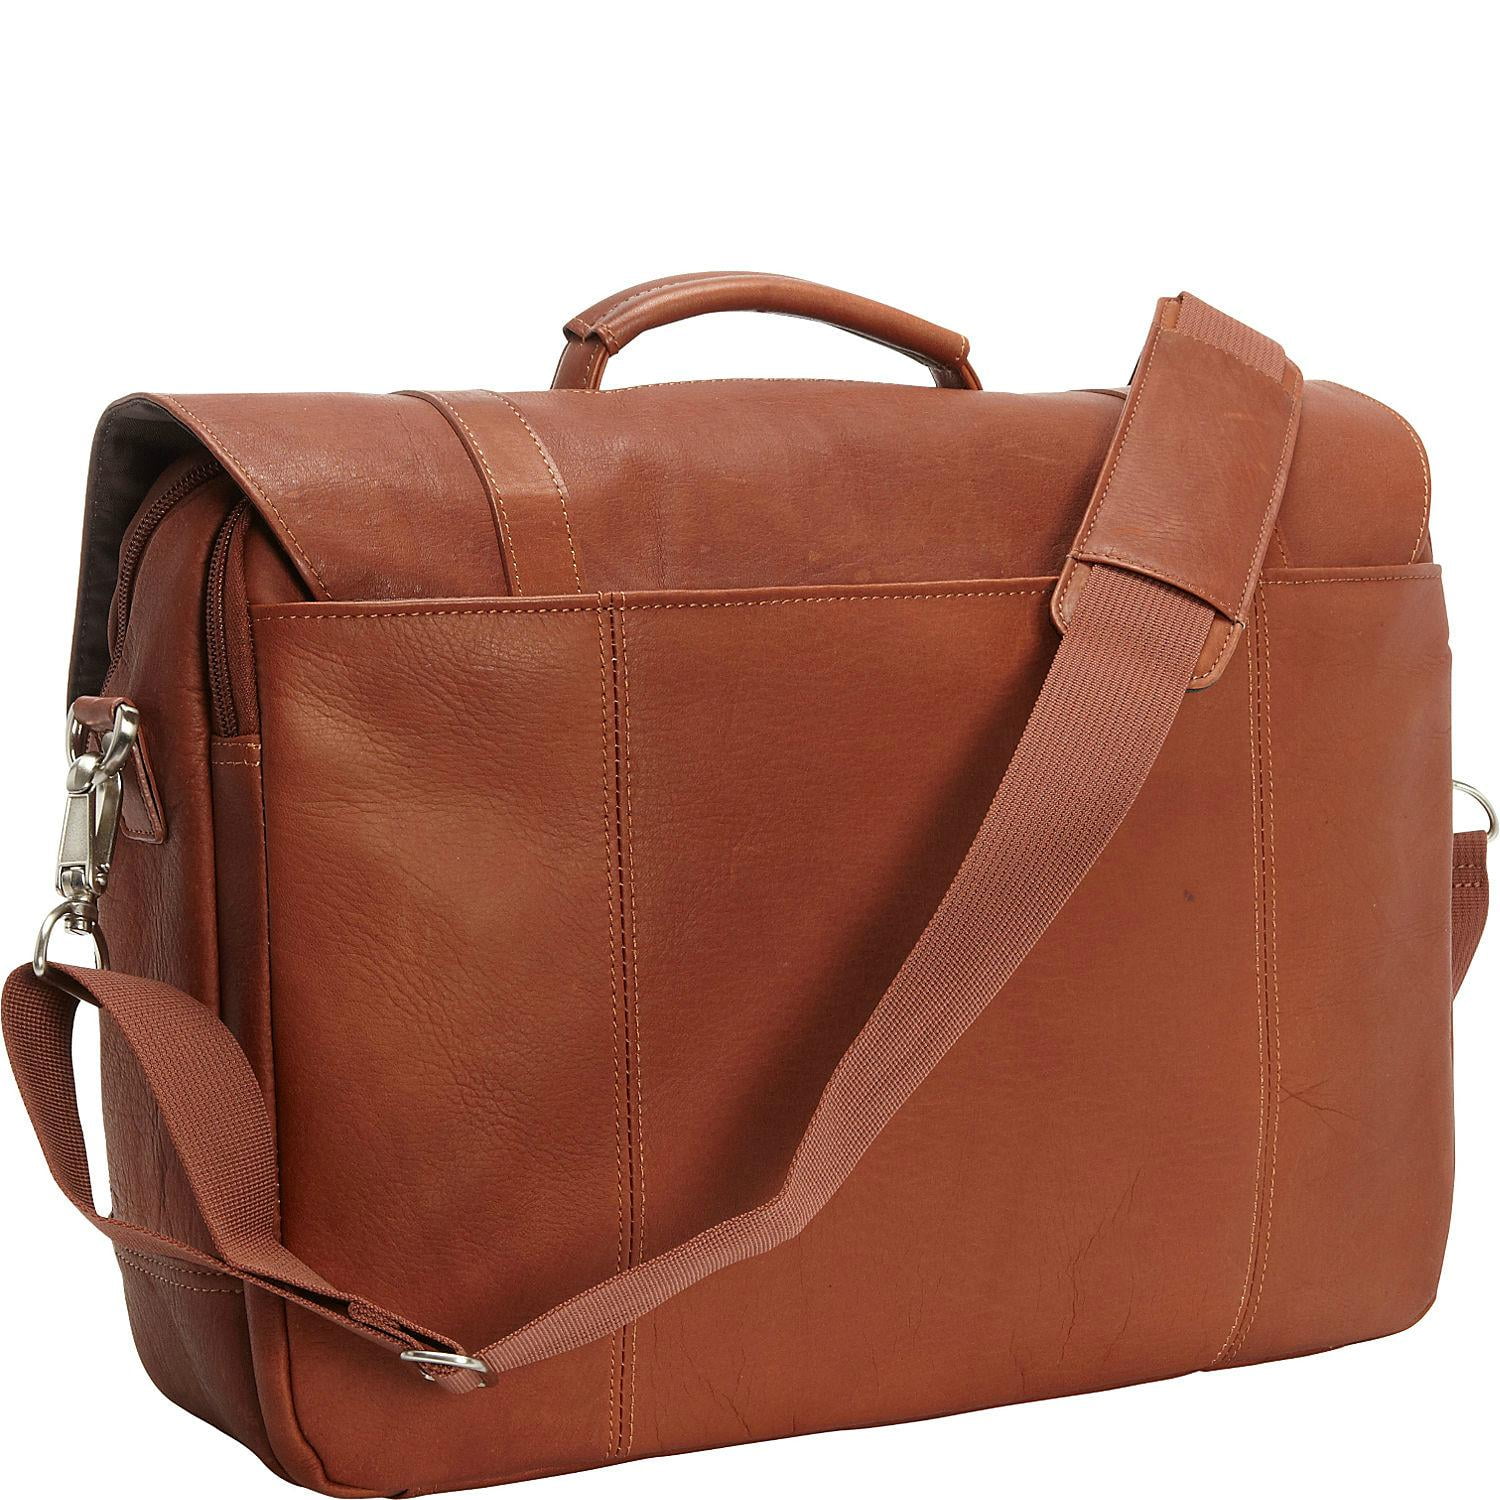 Kenneth Cole Reaction "Show Business" 4 Double Gusset Flapover Computer Case